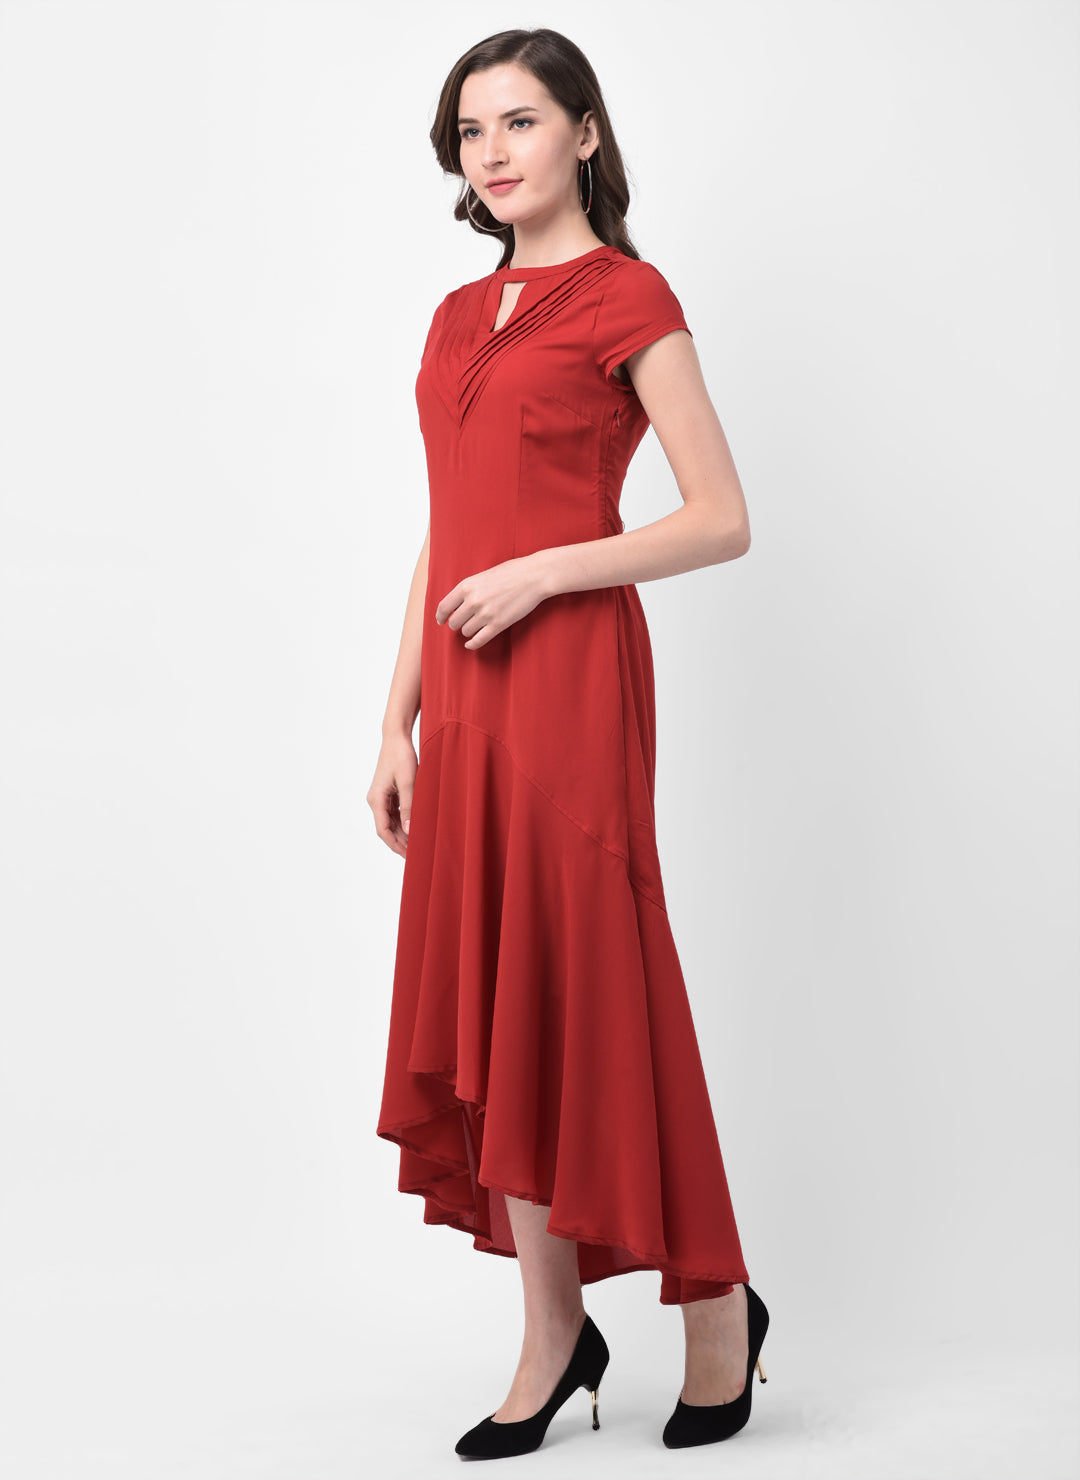 Red Cap Sleeve High Low Dress